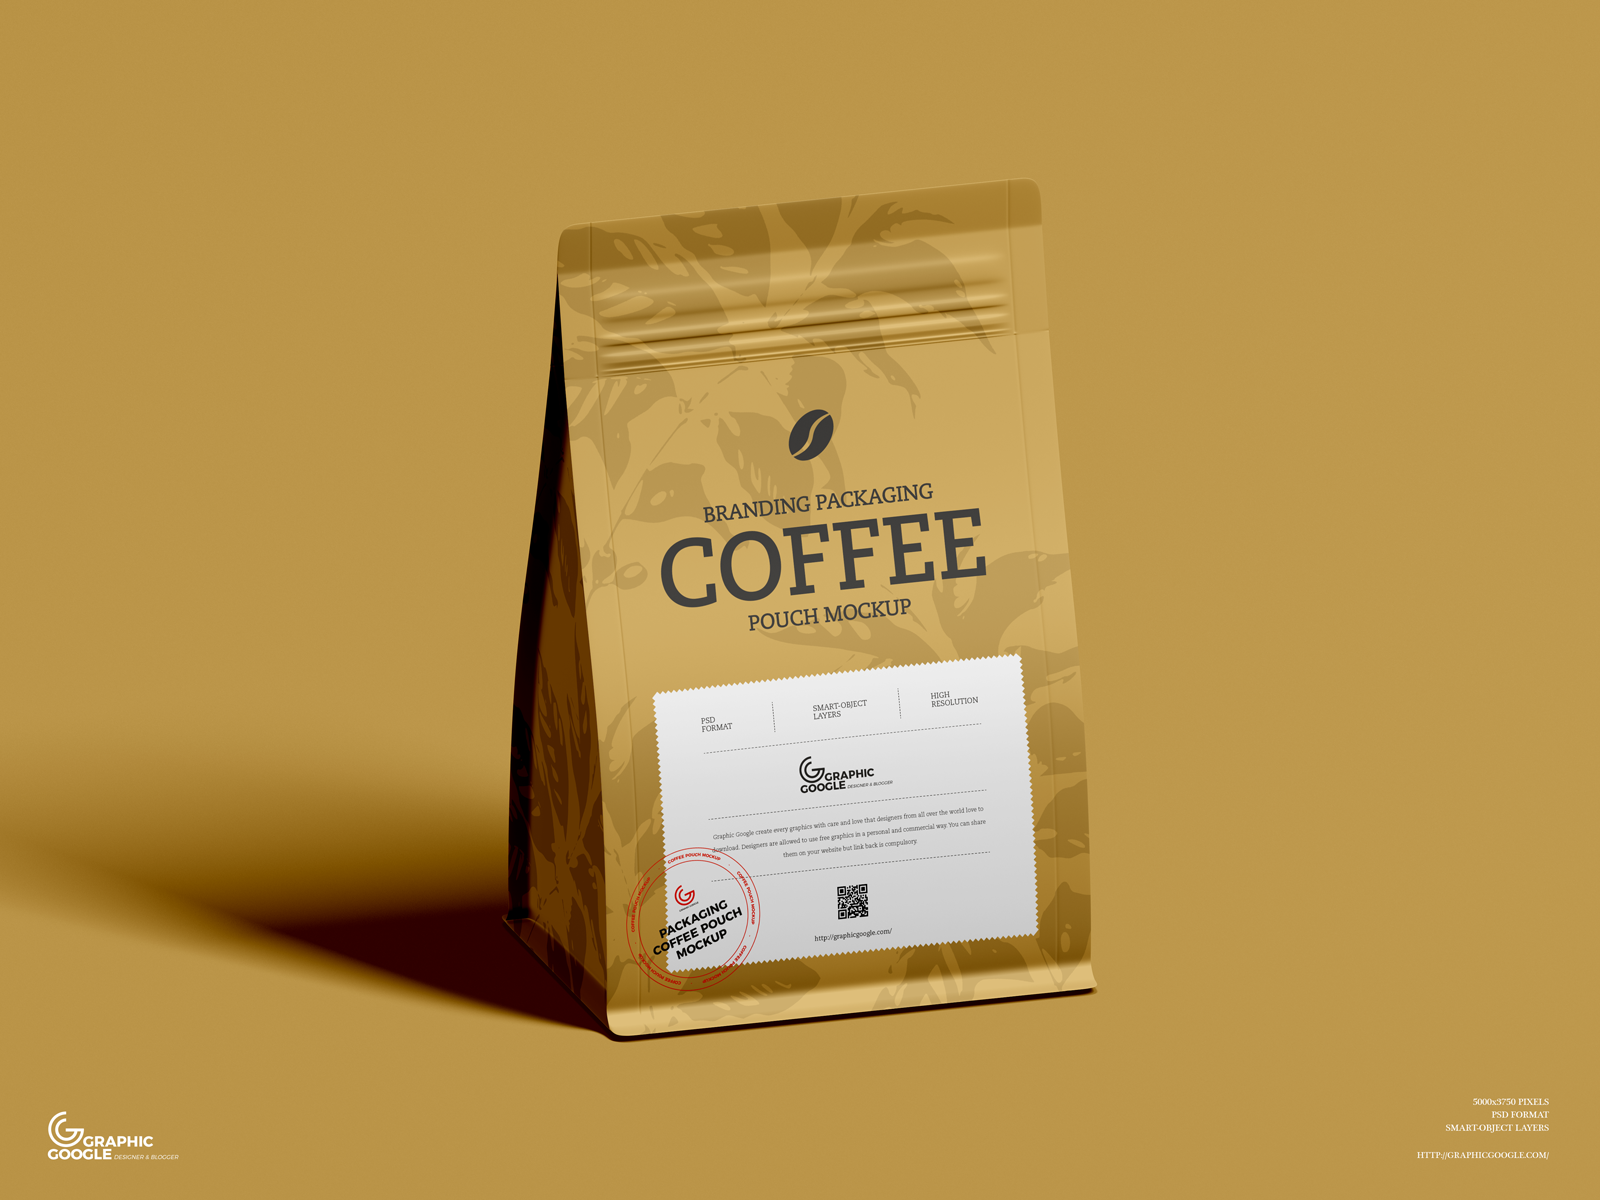 Download Free Coffee Packaging Pouch Mockup By Graphic Google On Dribbble